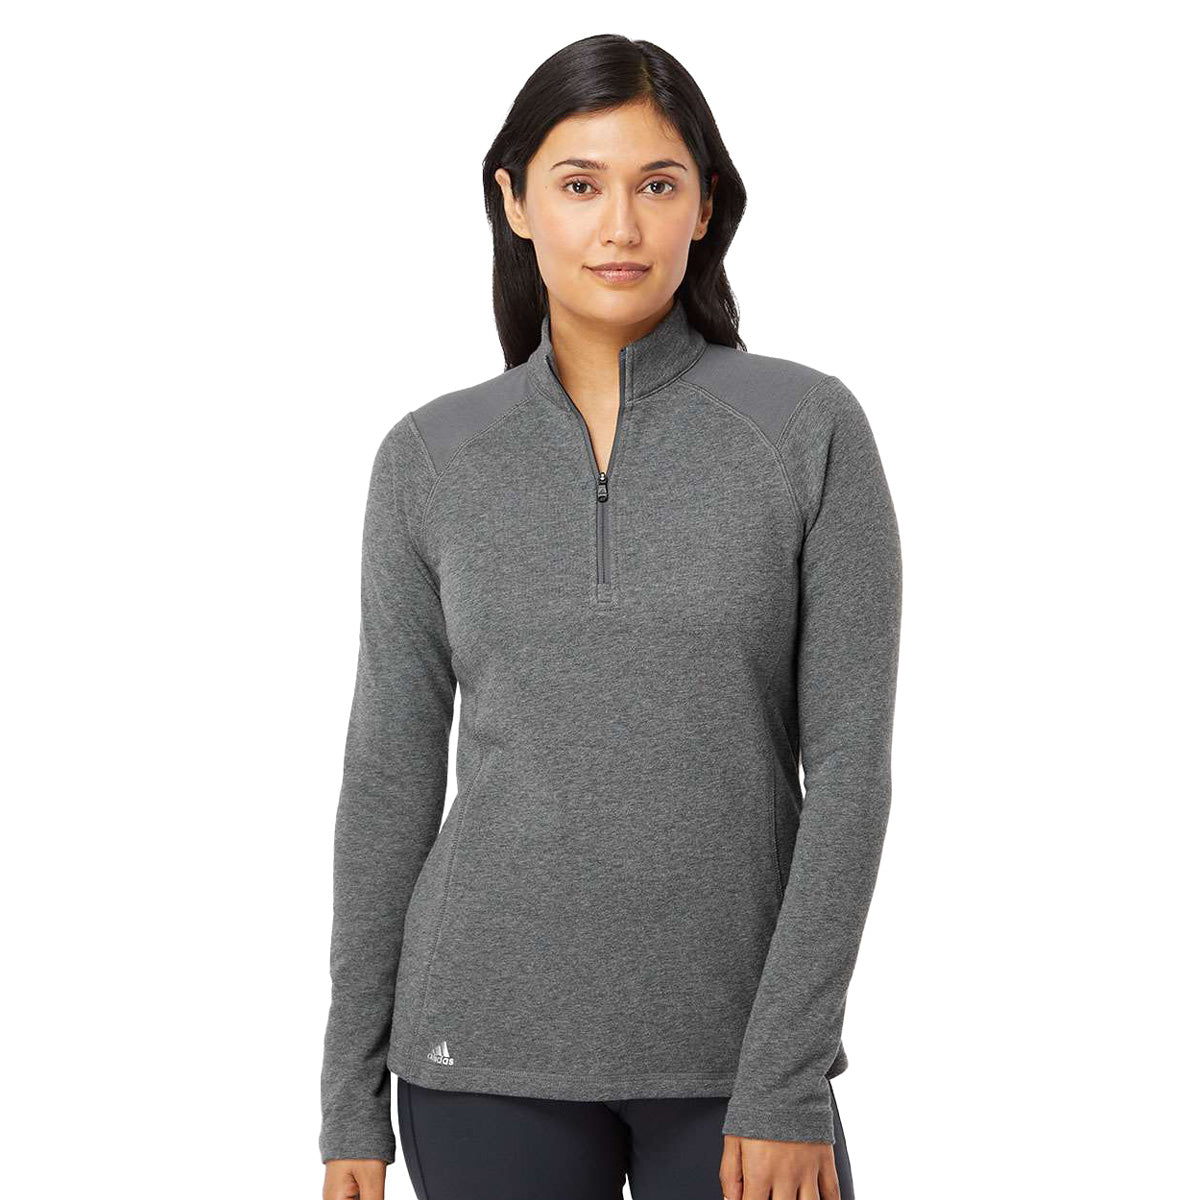 Image of adidas Women's Heathered Quarter-Zip Pullover with Colorblocked Shoulders